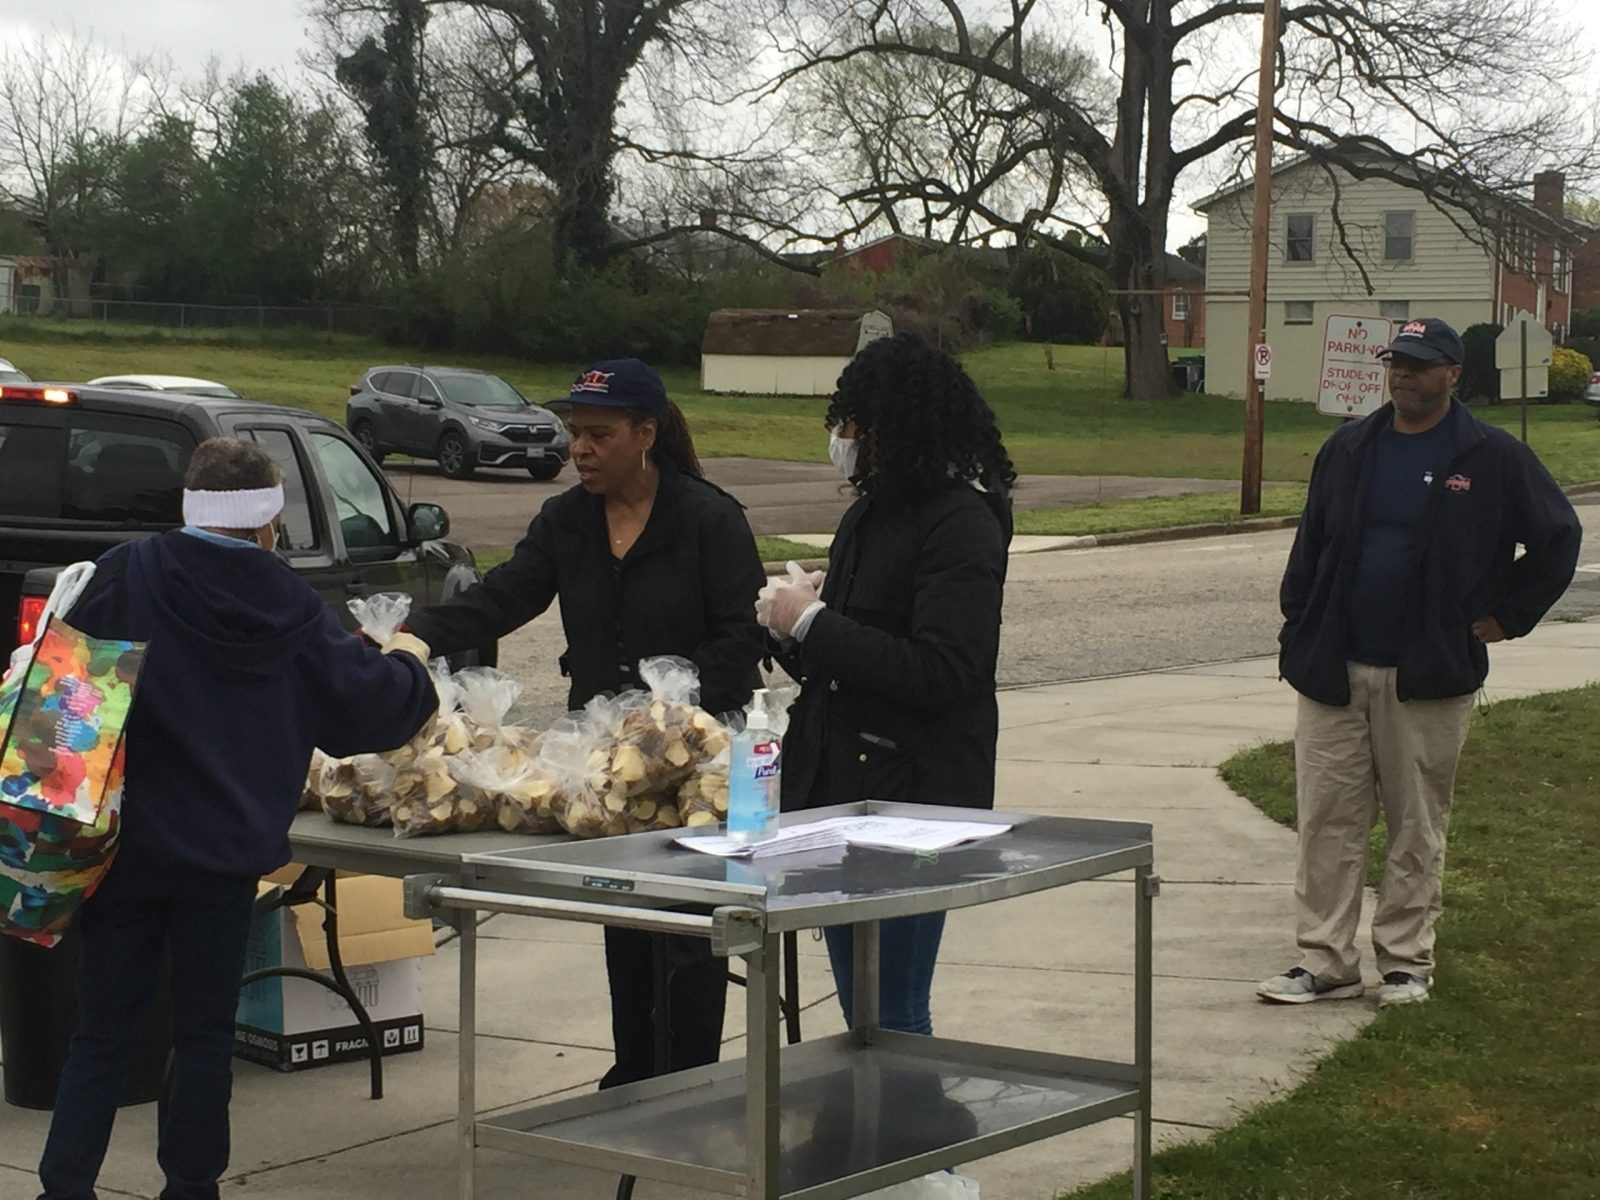 Food distribution volunteers hand out bags of cut up potatoes and recipe handouts